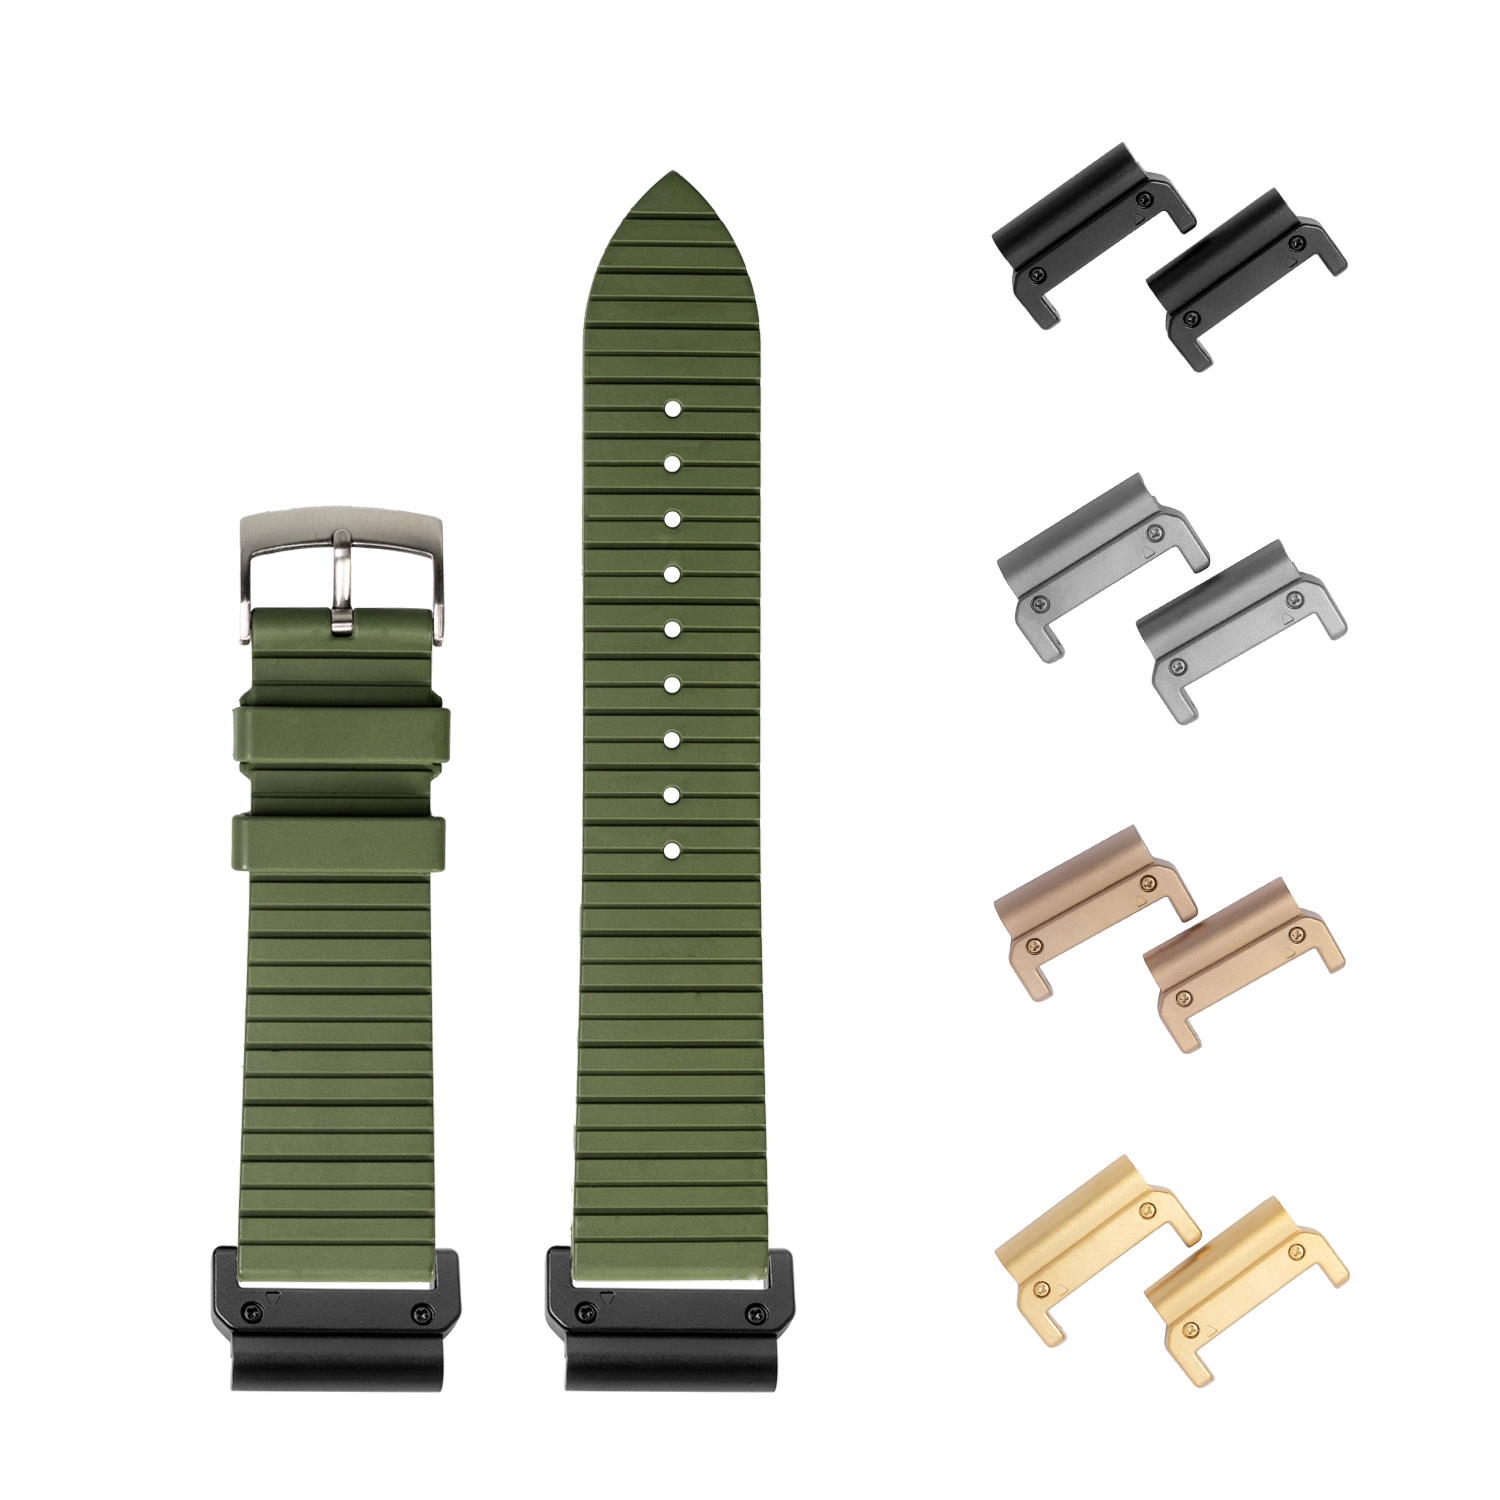 [QuickFit] King Panelarc FKM Rubber - Army Green 22mm